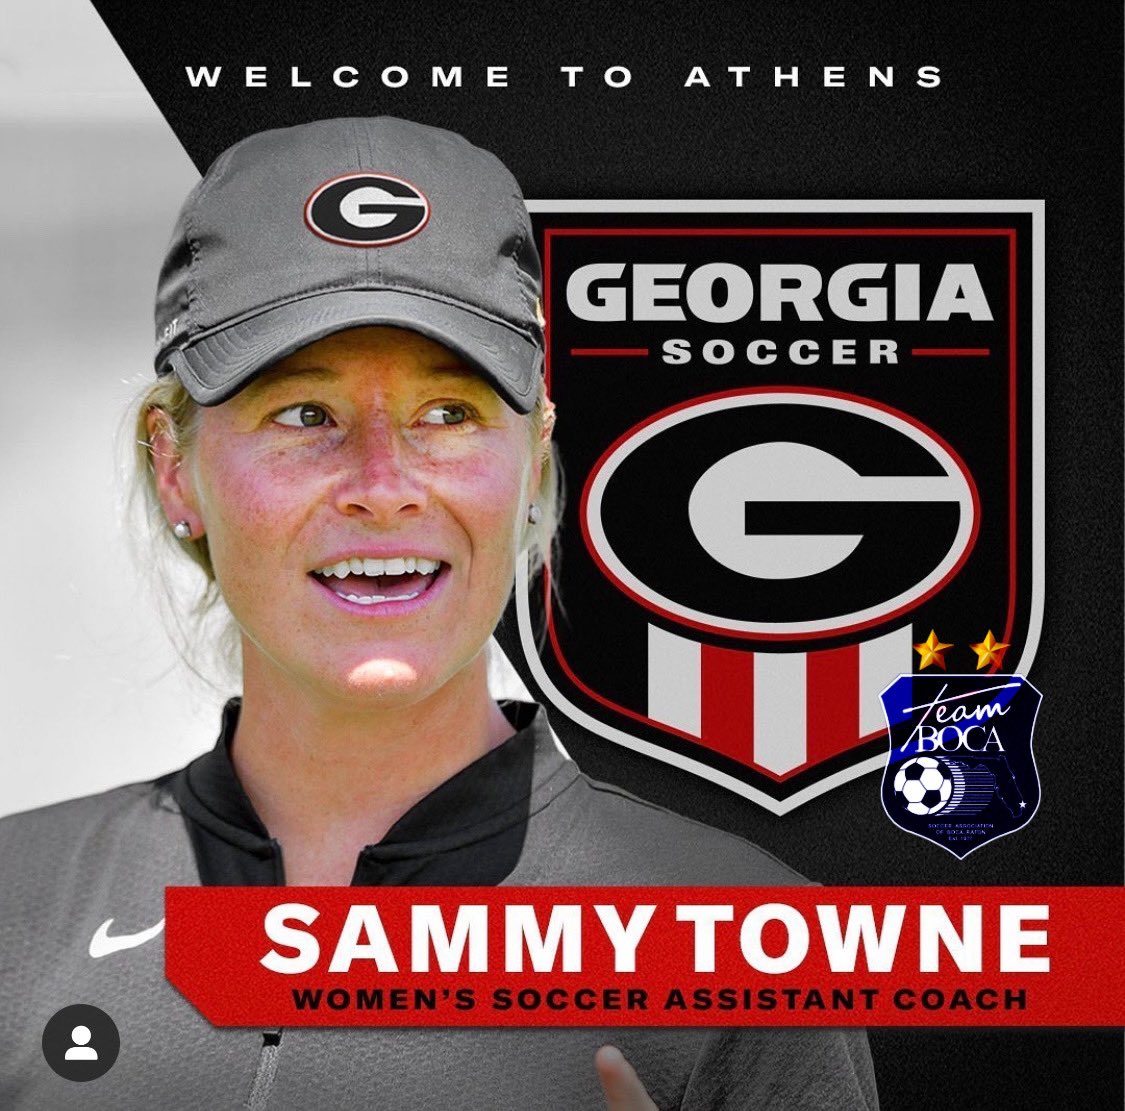 Congratulations to Team Boca alum, Sammy Towne for joining the coaching staff at the University of Georgia. @FYSASoccer @GotSoccer @CityBocaRaton